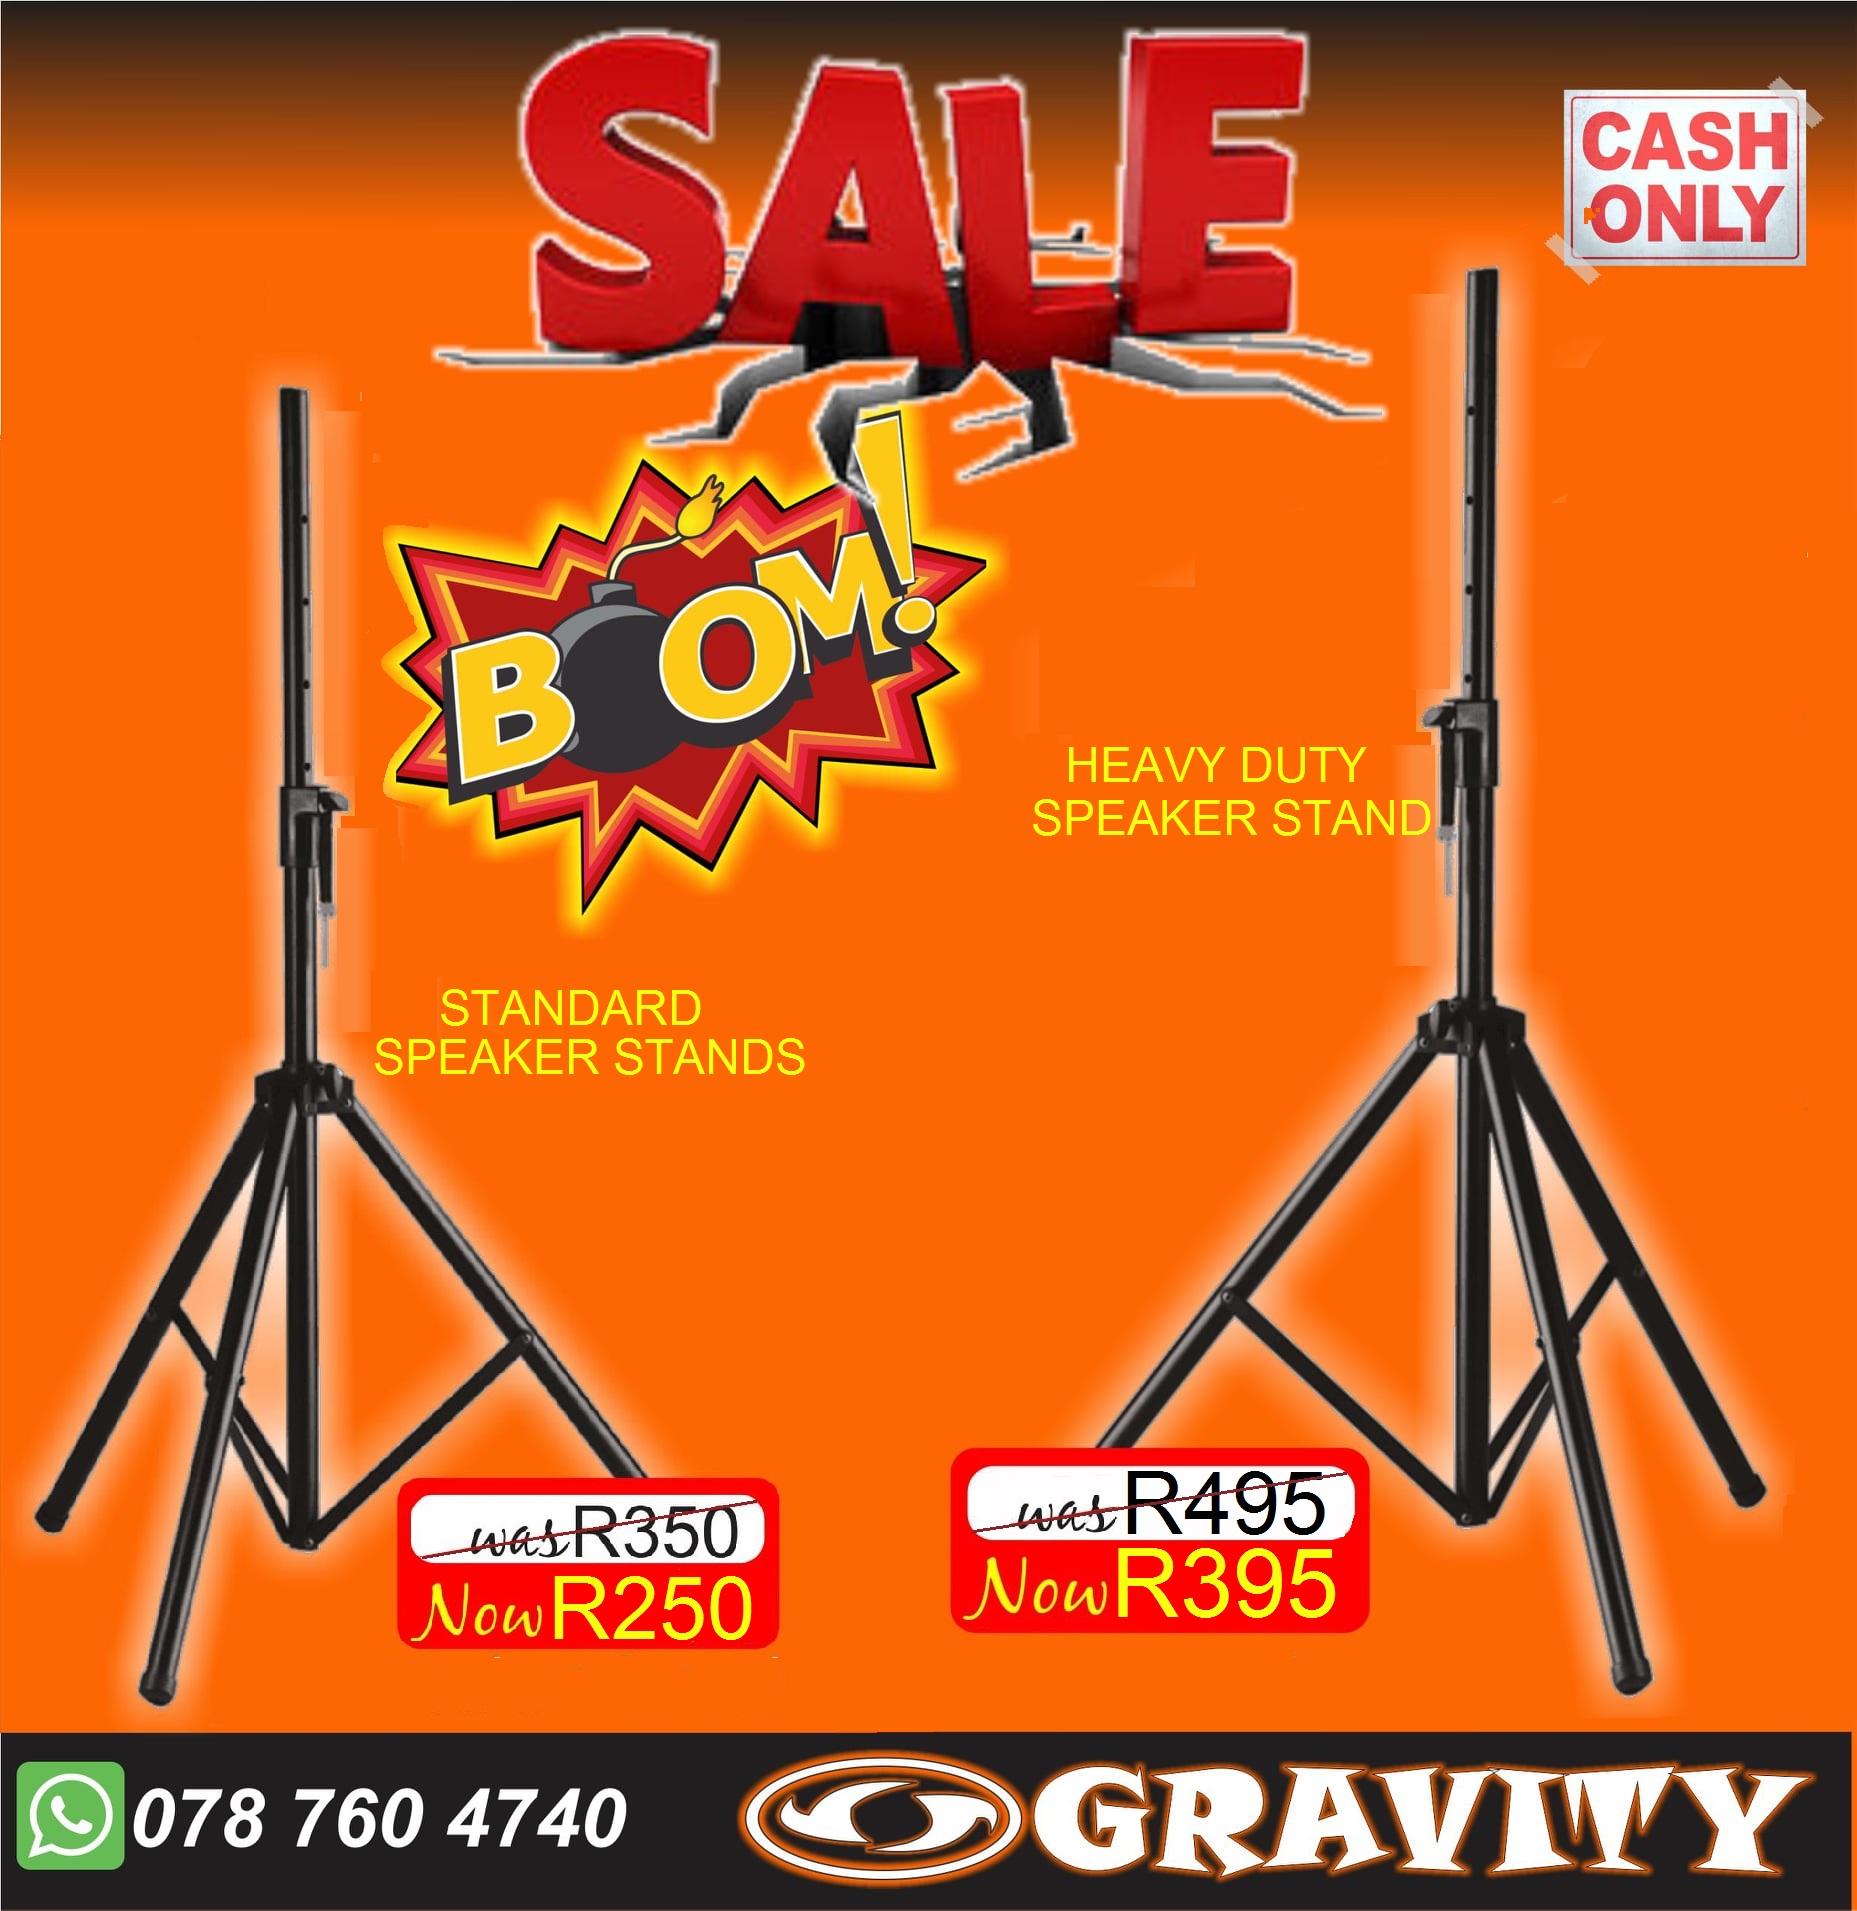 speaker stands , car audio combo , car audio equipment , sony , pioneer ,jvc , kicker , targa , xtc , jbl . starsound  | car audio durban | car audio fitment durban | dj sound durban | disco dj pa equipment durban | disco dj lighting durban | dj mixer durban | dj power amp durban | tv box durban | air mouse durban | behringer durban | gravity sound and lighting warehouse durban | dj smoke achine durban | dj smoke fluid durban | disco dj lighting durban | disco dj led lighting durban | disco dj lazer lighting durban | car amps durban | car decks durban | car bluetooth decks durban | car van double dins durban | car subs durban | starsound grey cones subwoofers durban | Car accessories durban | disco dj party combos durban | J EQUIPMENT | DISCO DJ LIGHTING | DJ/PA COMBO PACKAGES | MULITIMEDIA | MOBILE DISCO-DJ FOR HIRE  SOUND EQUIPMENT HIRE | PROJECTOR AND SCREEN FOR HIRE | ELECTRONIC REPAIR CENTRE  GHD HAIR IRON REPIARS-CLOUD NINE | PUBLIC ADDRESS SYSTEMS | PA DESK MIXERS  SANITIZER FOGGING MACHINES | POWER AMPLIFER | CROSSOVE